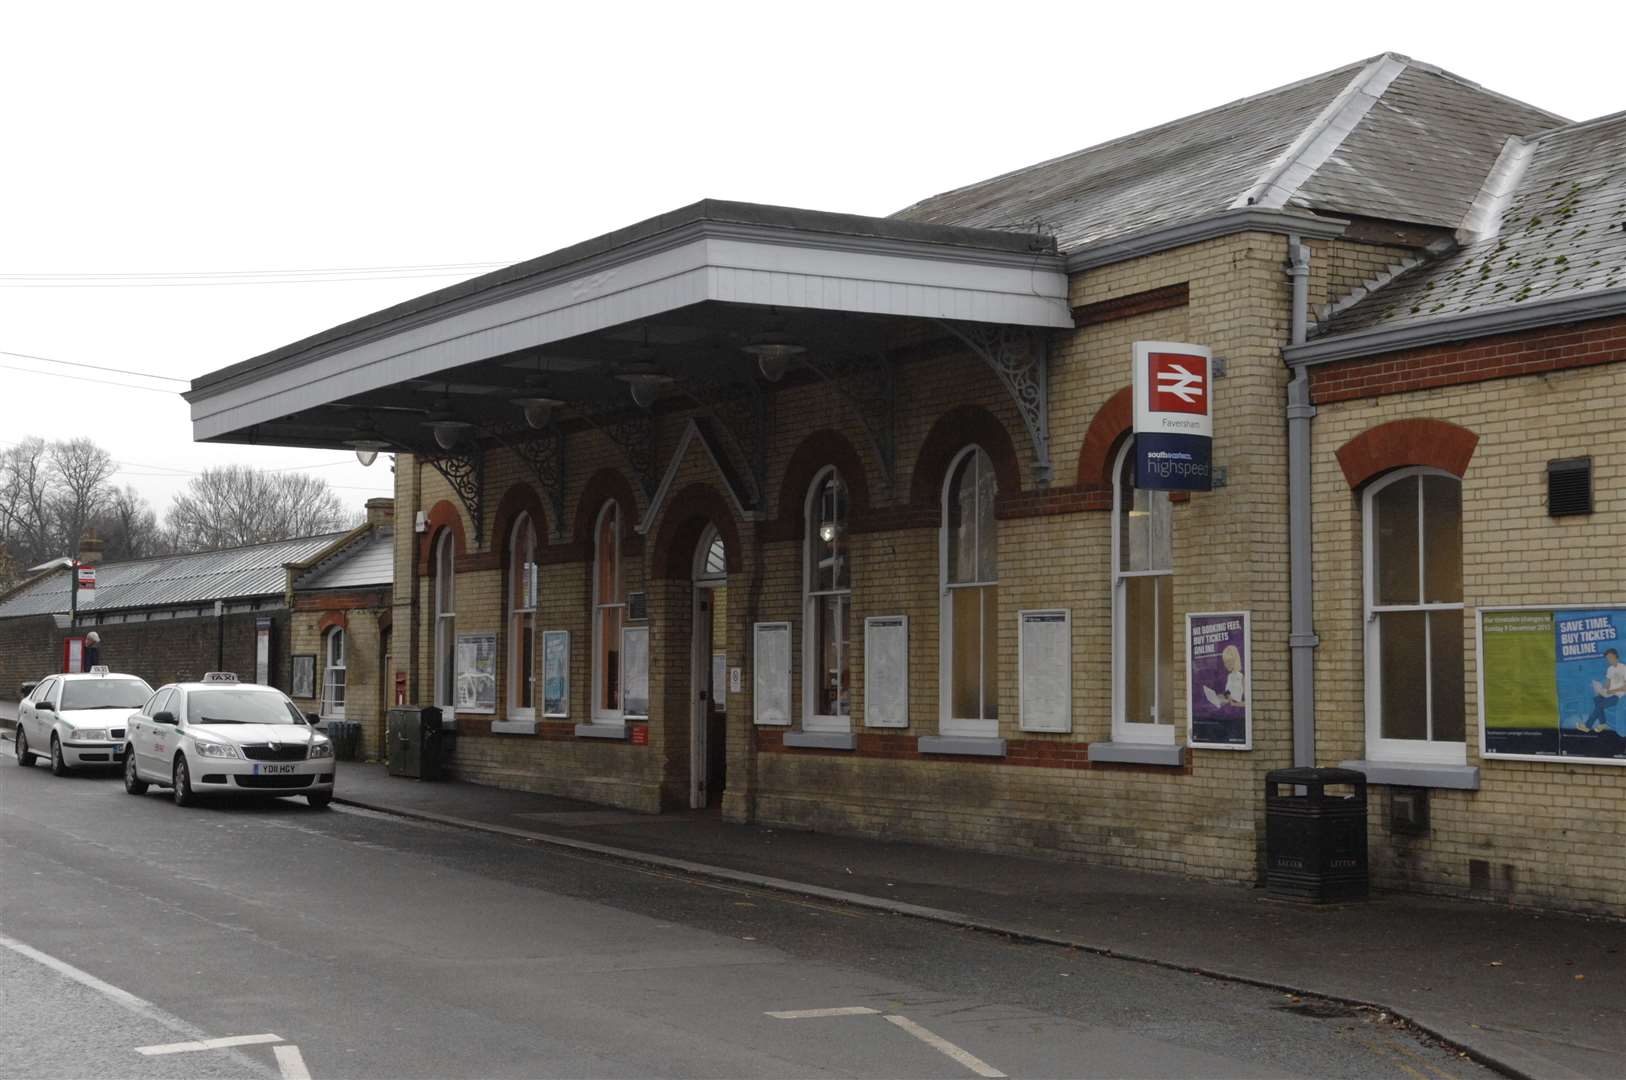 Southeastern says it has invested £1 million in improving the station